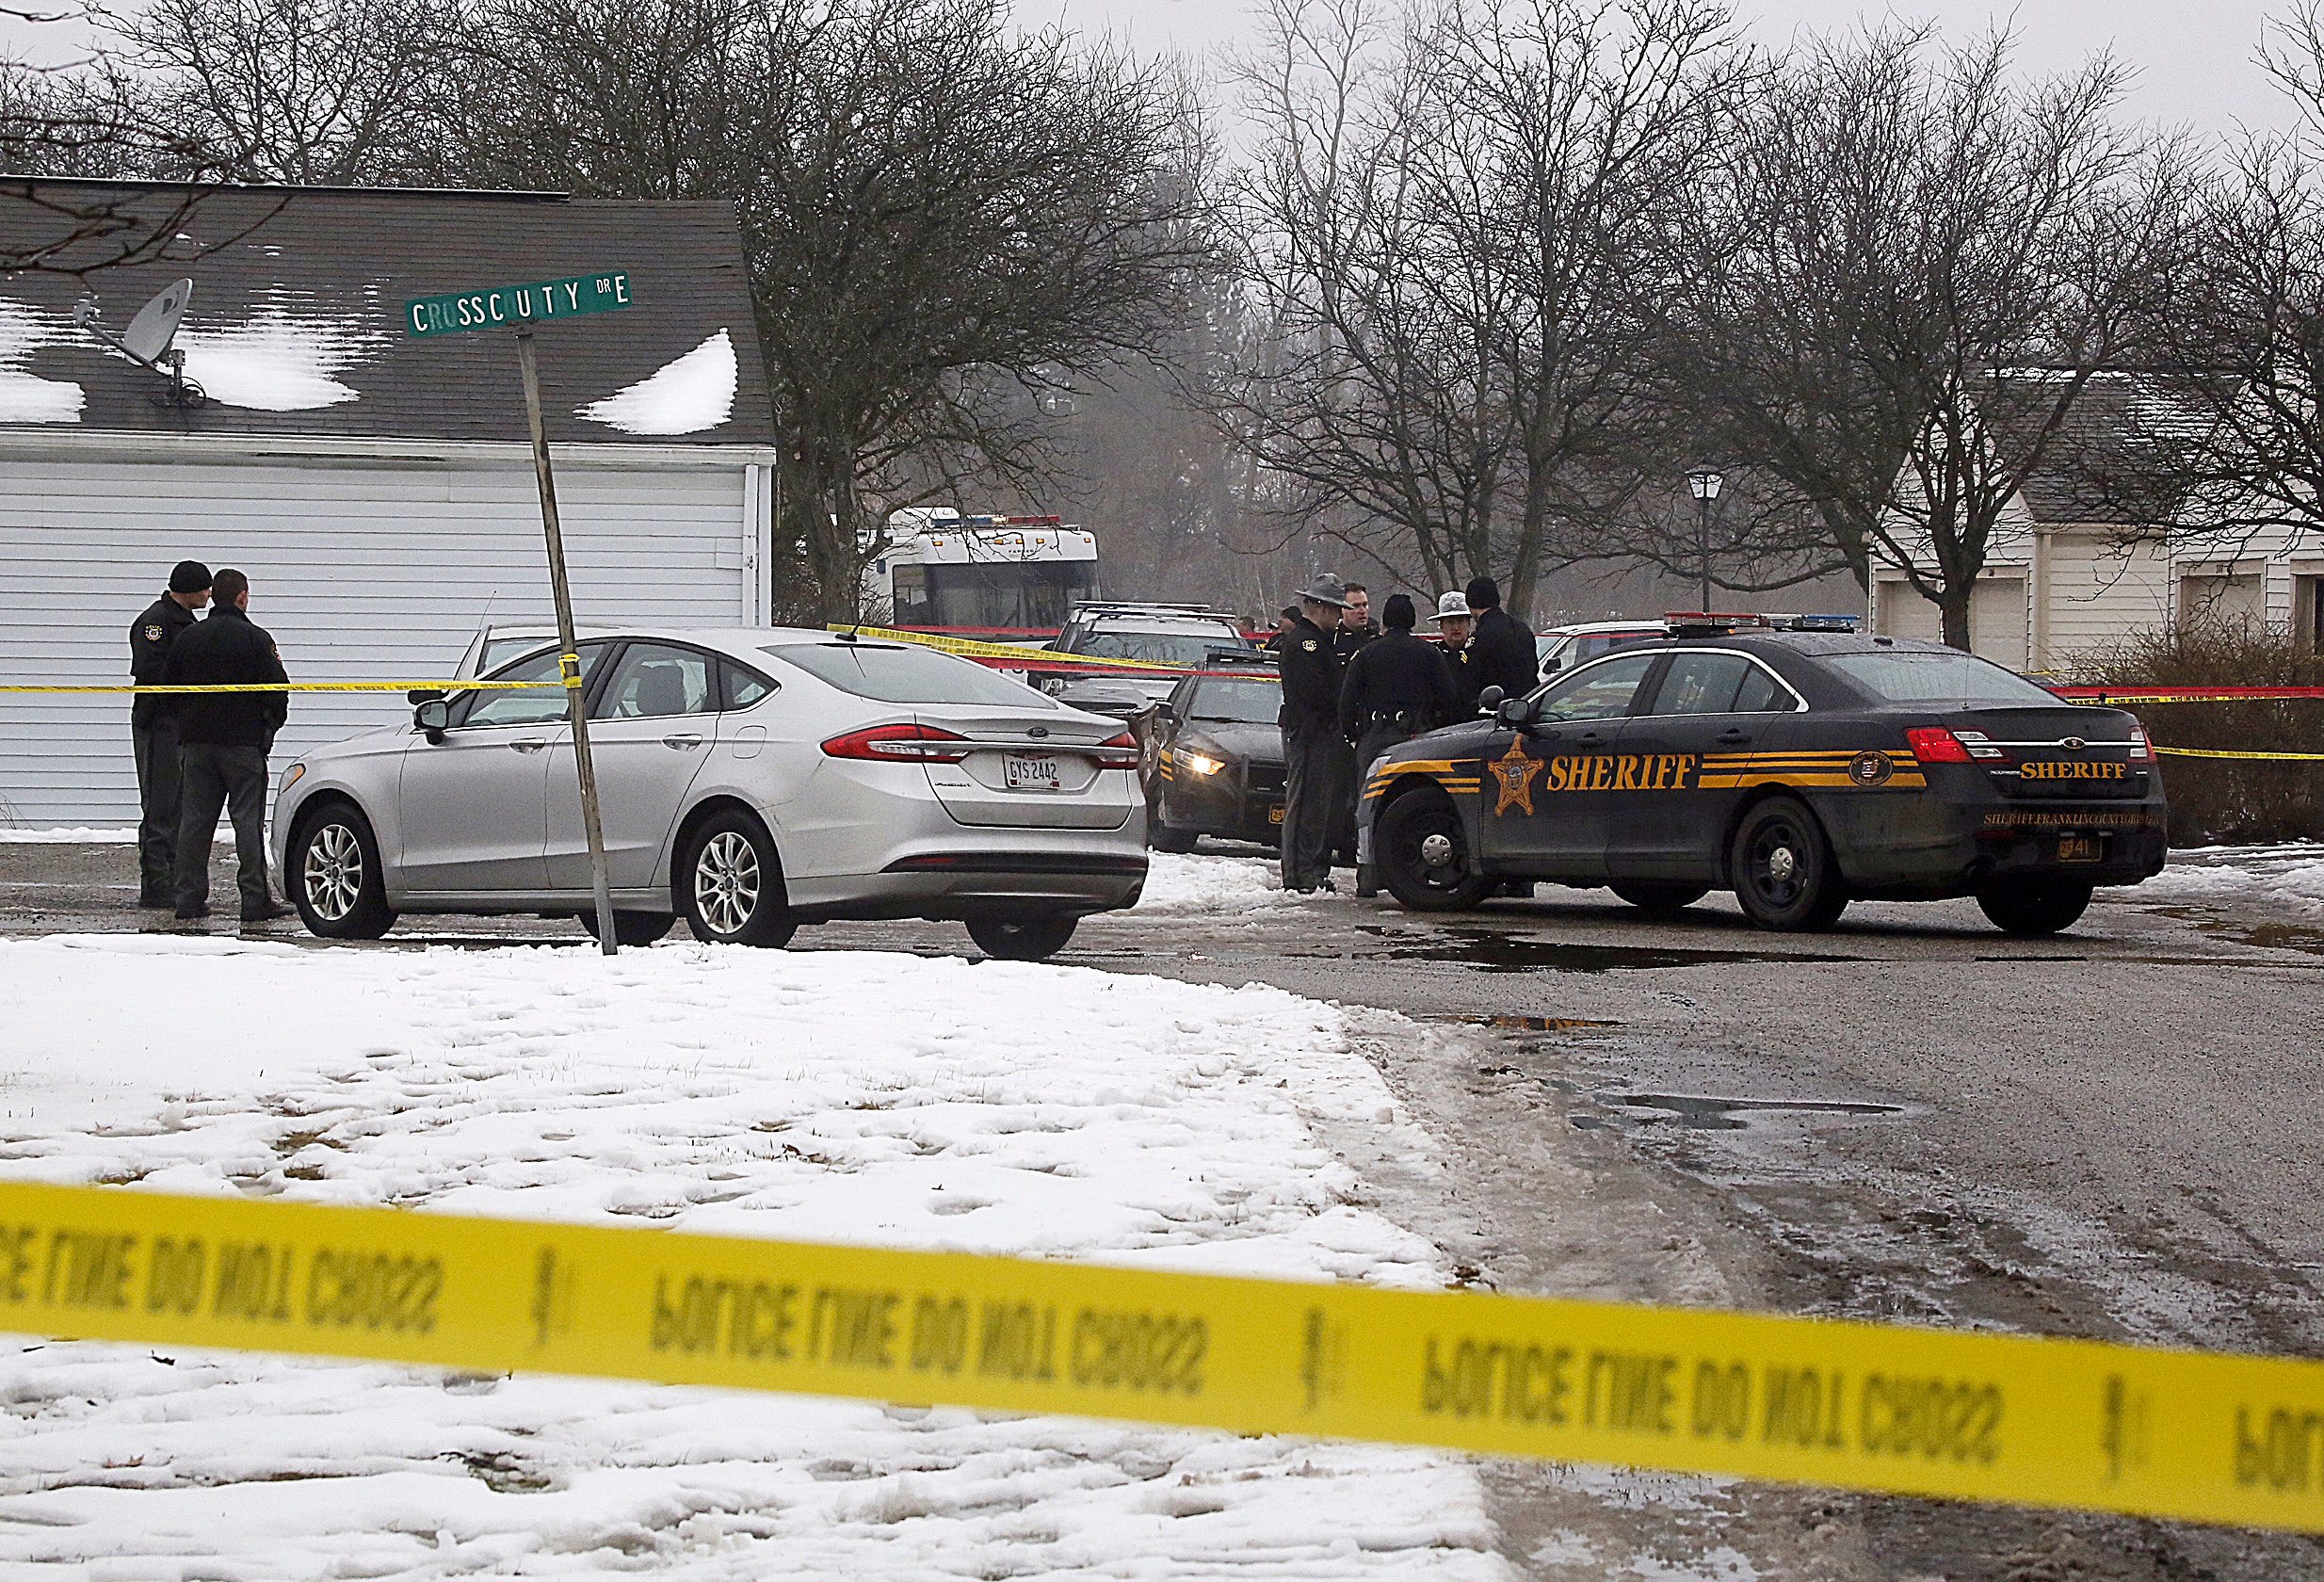 Prosecutor will seek the death penalty if Westerville shooting suspect survives